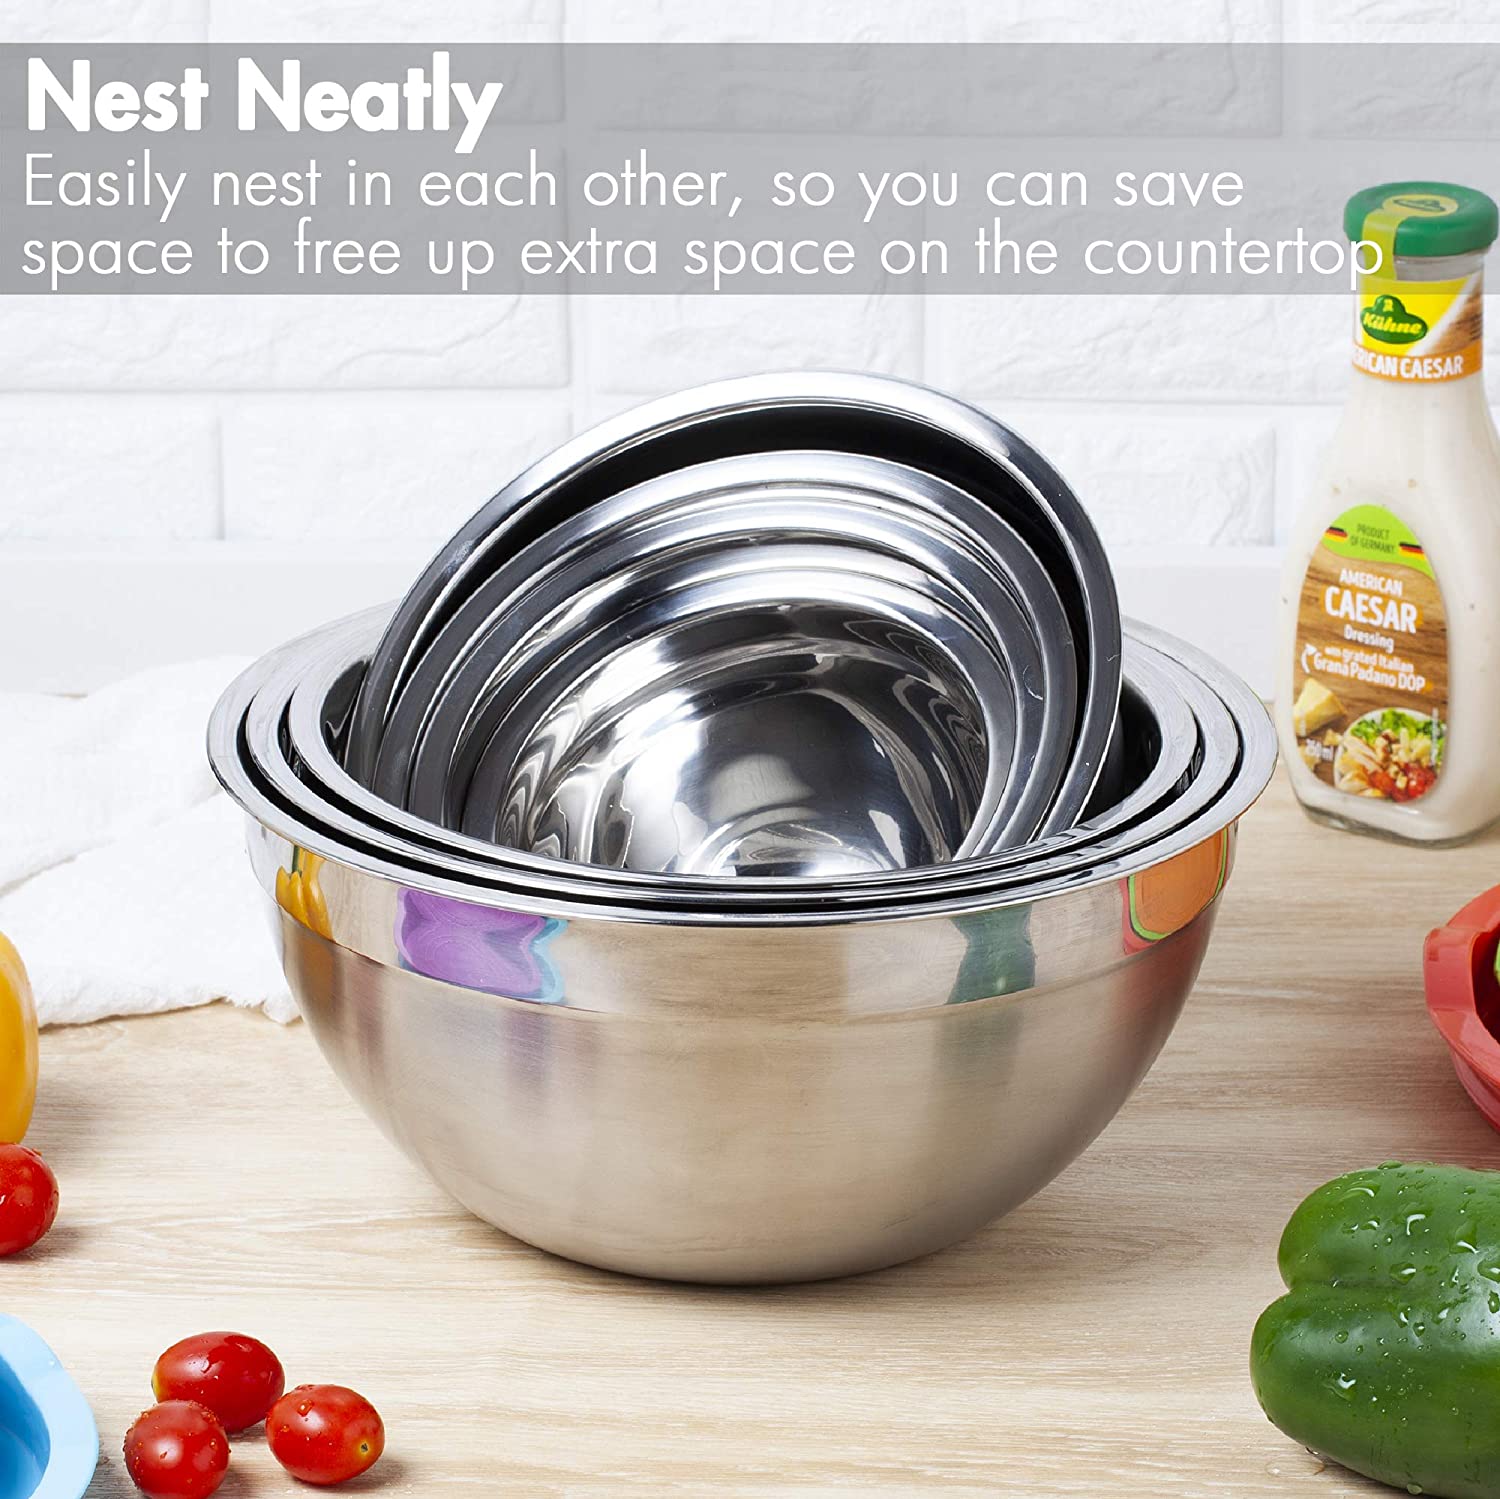 Mixing Bowls with Lids Set, Stainless Steel Mixing Bowls with